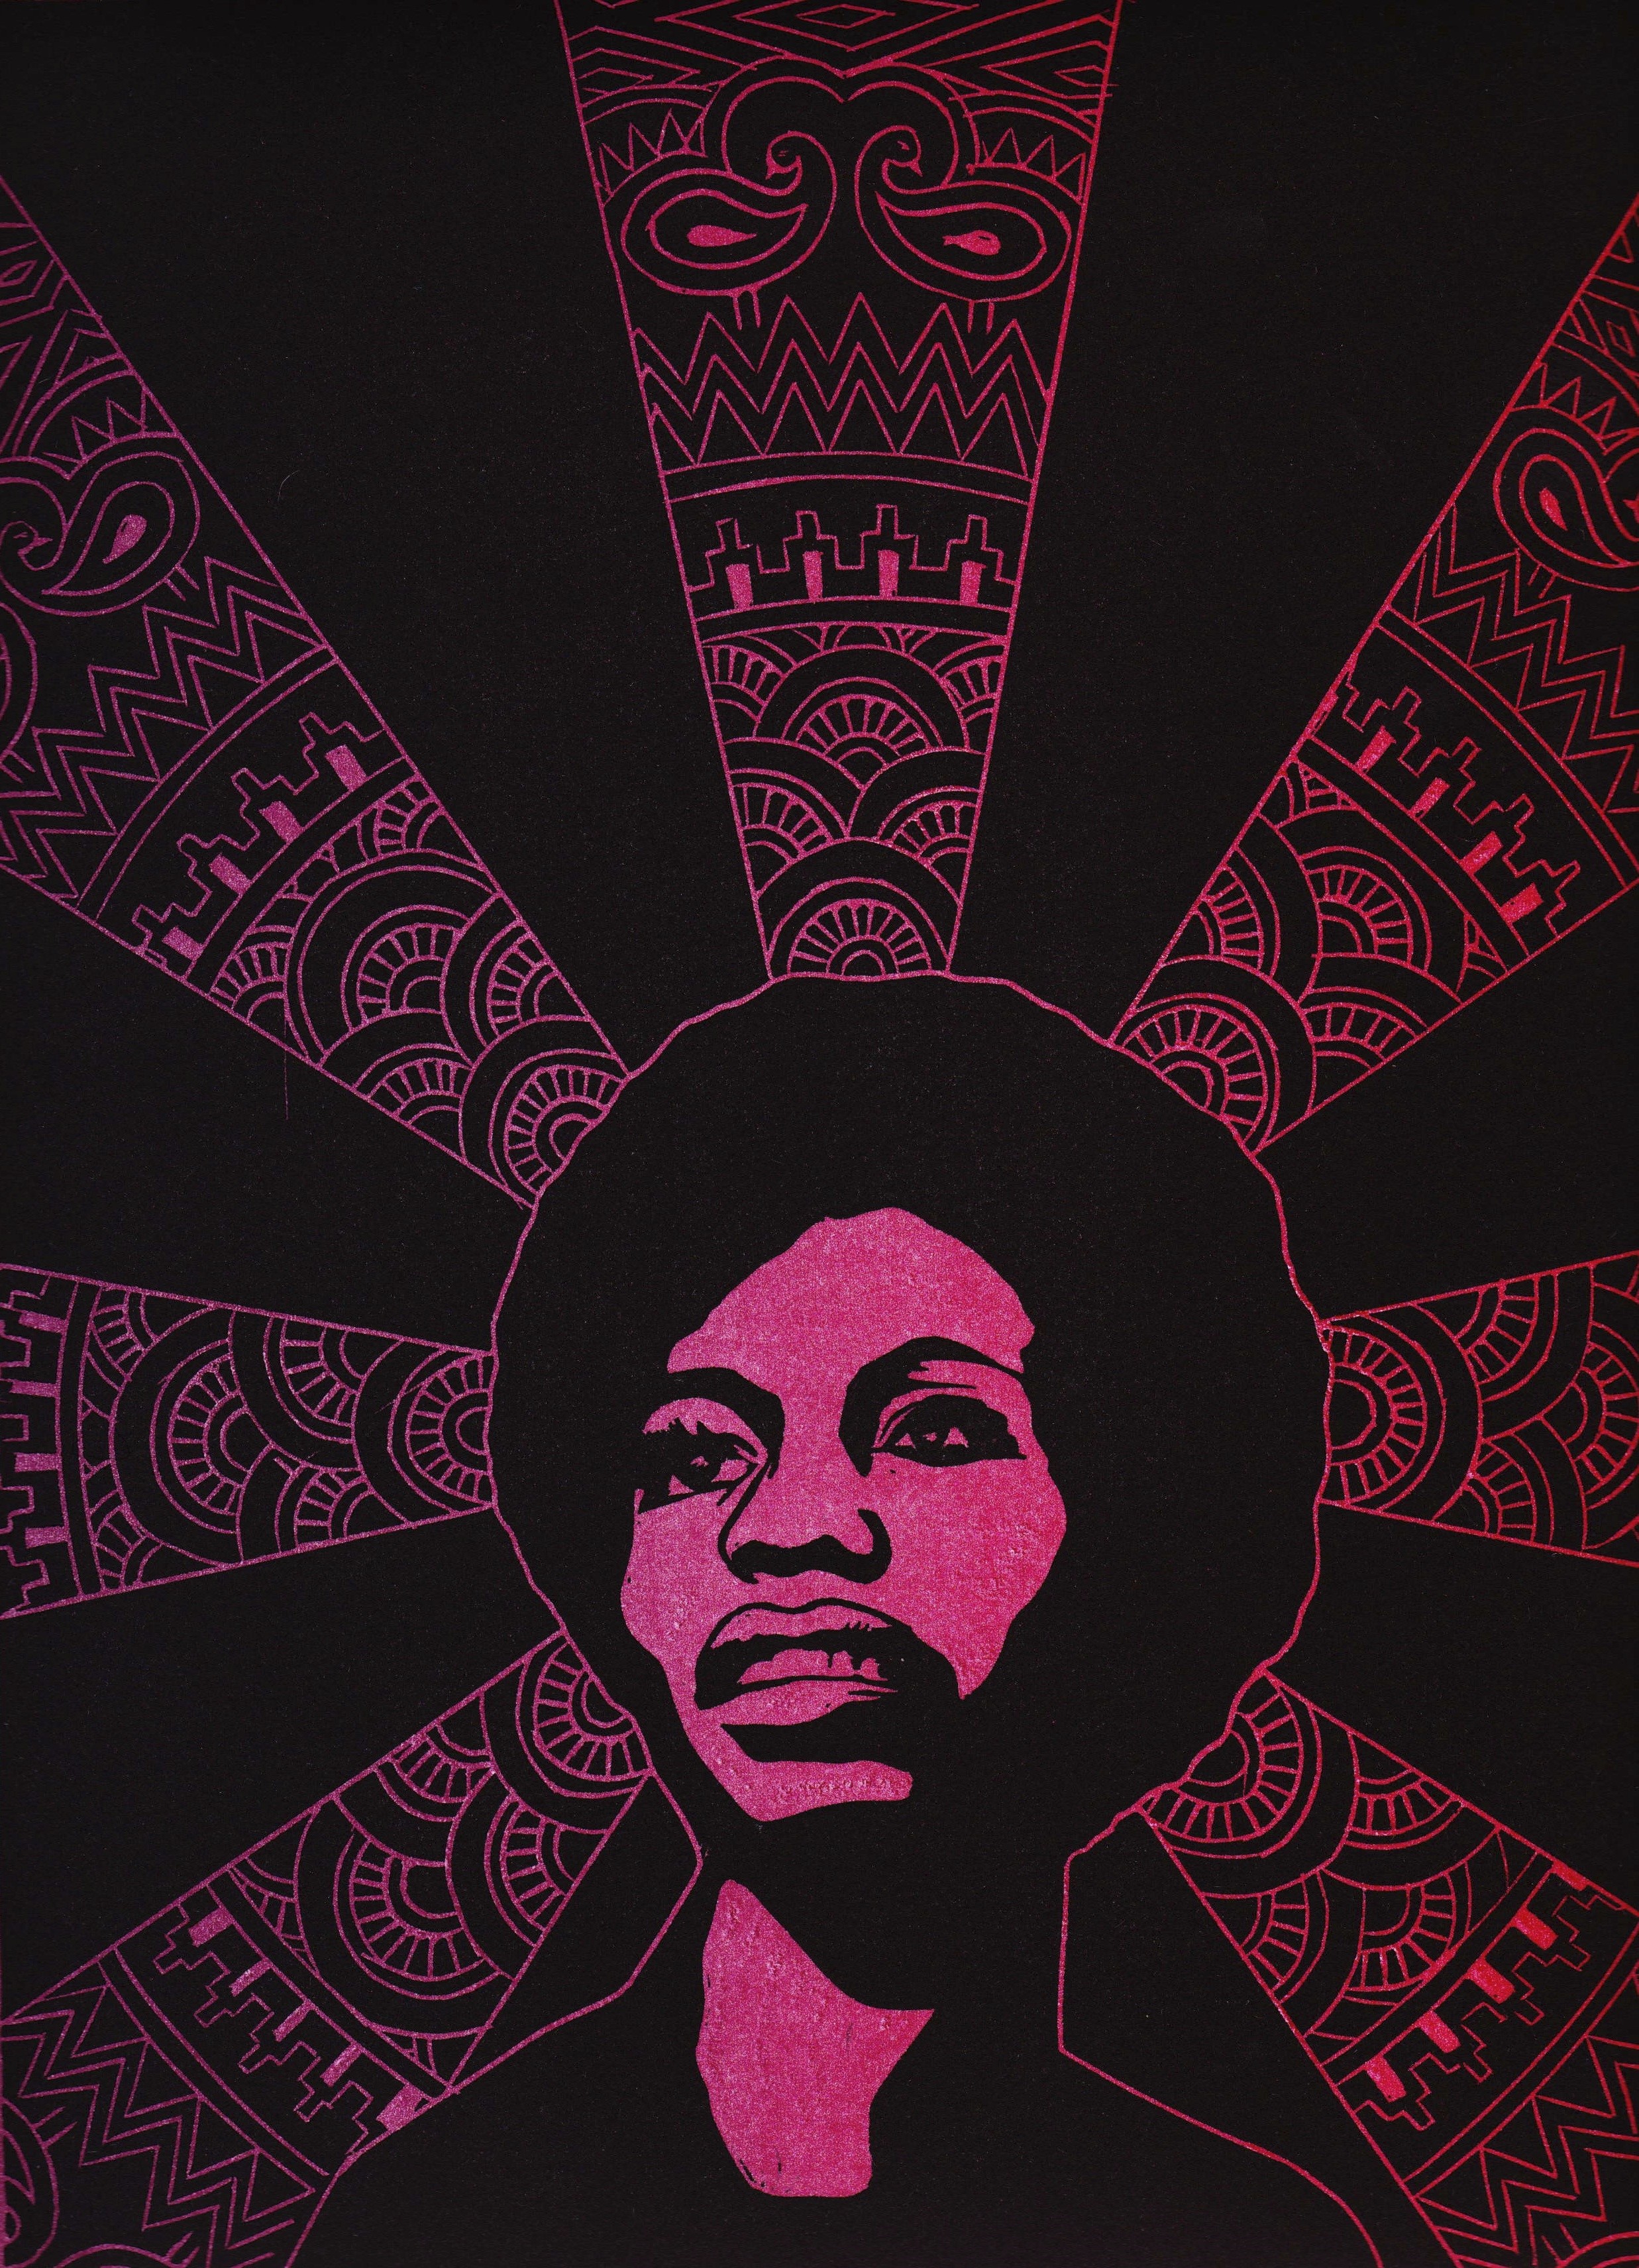 The Horton Art Gallery at San Joaquin Delta College presents "Queer Voices" from Oct. 11-Nov. 2. This piece is "Nina Simone" Queer Ancestors Project by Amman Desai